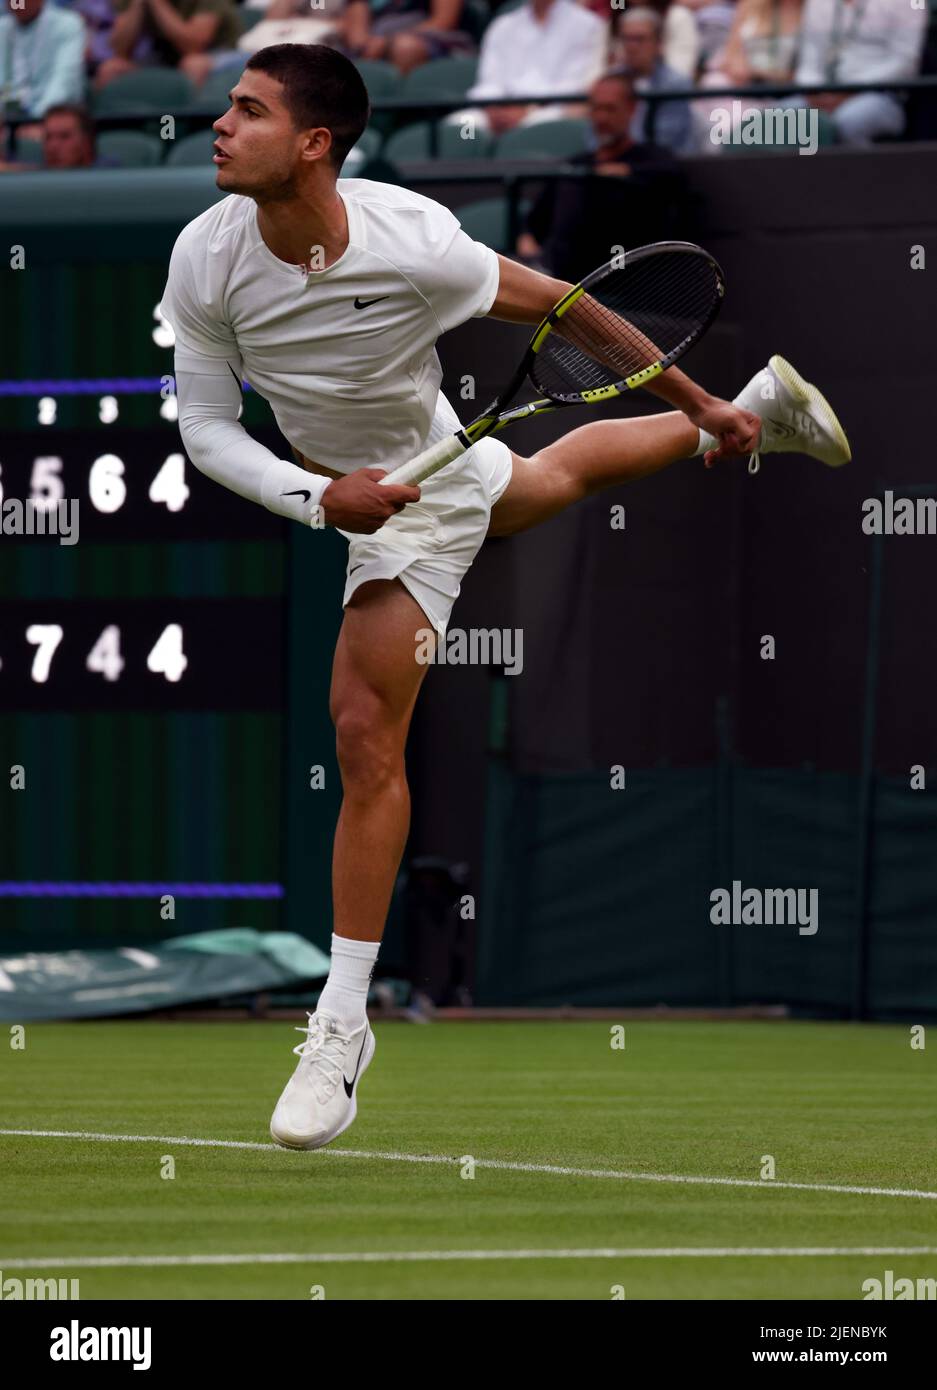 London, 27 June 2022 - Spain's Carlos Alcarraz serving Jan-Leonard STRUFF during their opening round match on Court Number One at Wimbledon today. Credit: Adam Stoltman/Alamy Live News Stock Photo